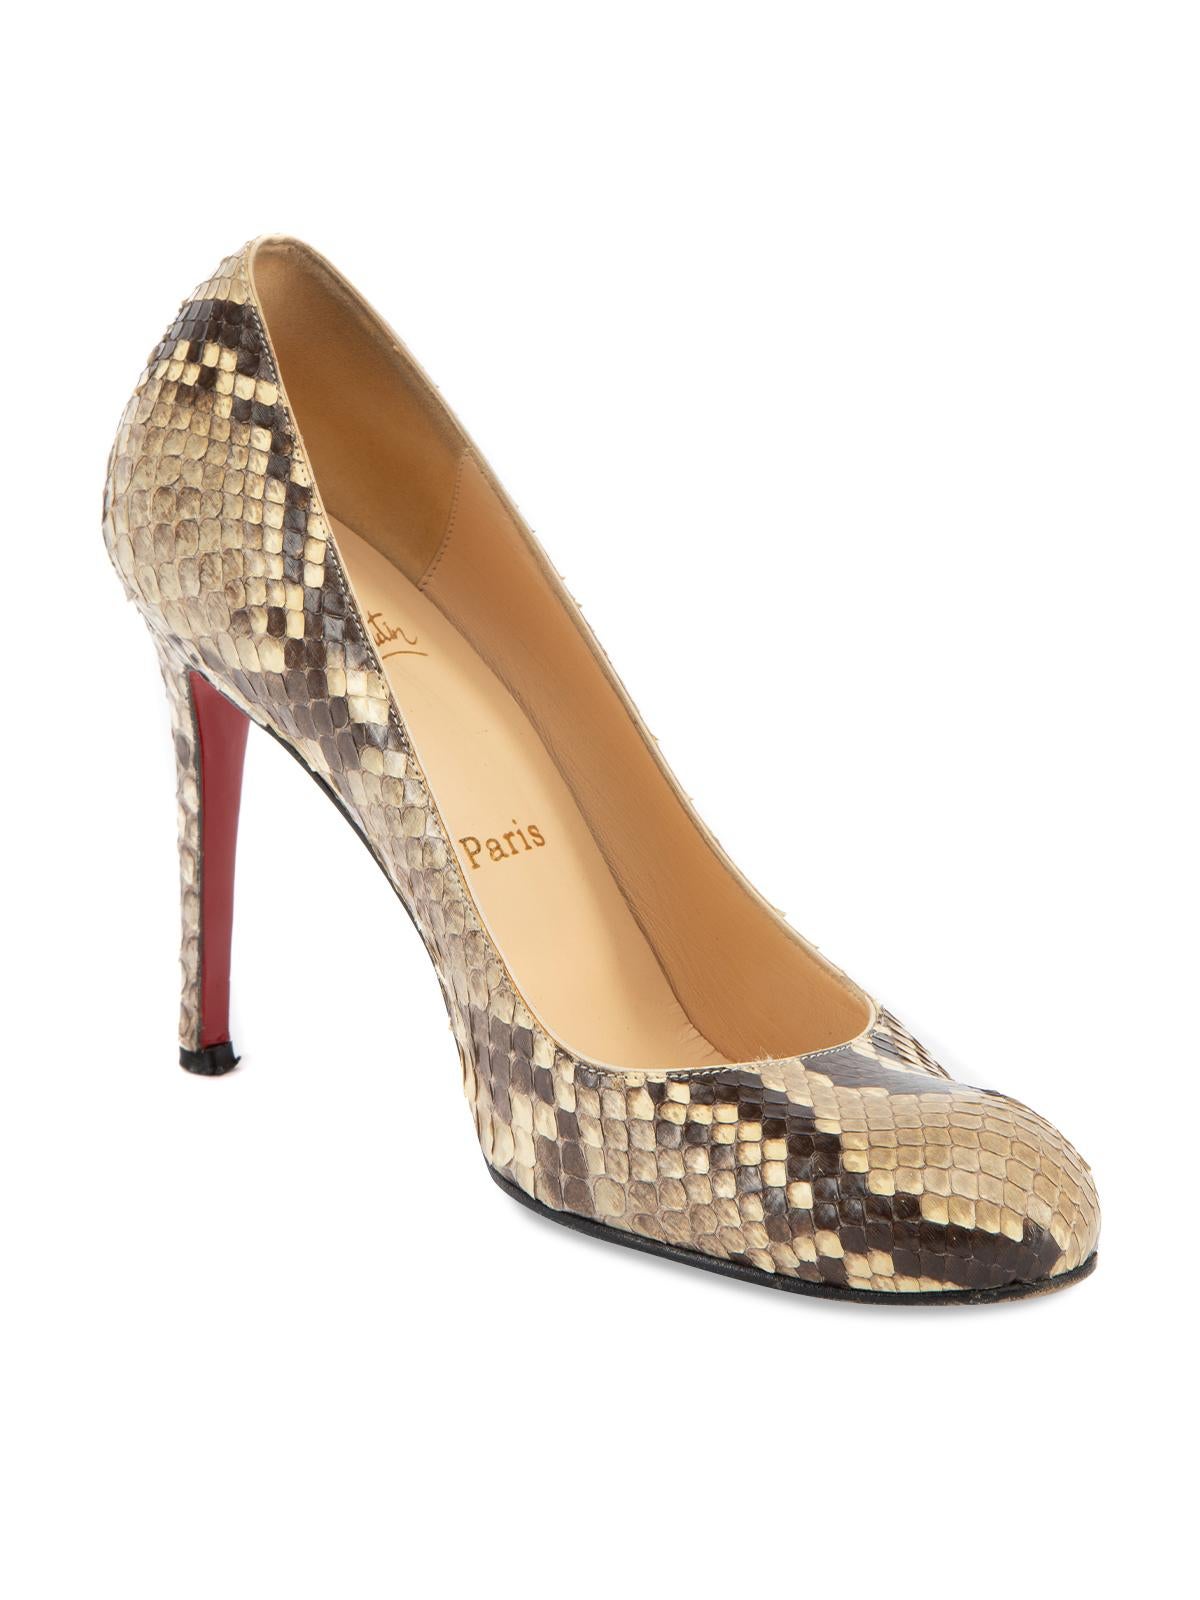 CONDITION is Very good. Minimal wear to heels is evident. Minimal wear to the outsole and heel tip. There are also minimal loose threads around the shoe rim on this used Christian Louboutin designer resale item. Details Beige Exotic leather- Real